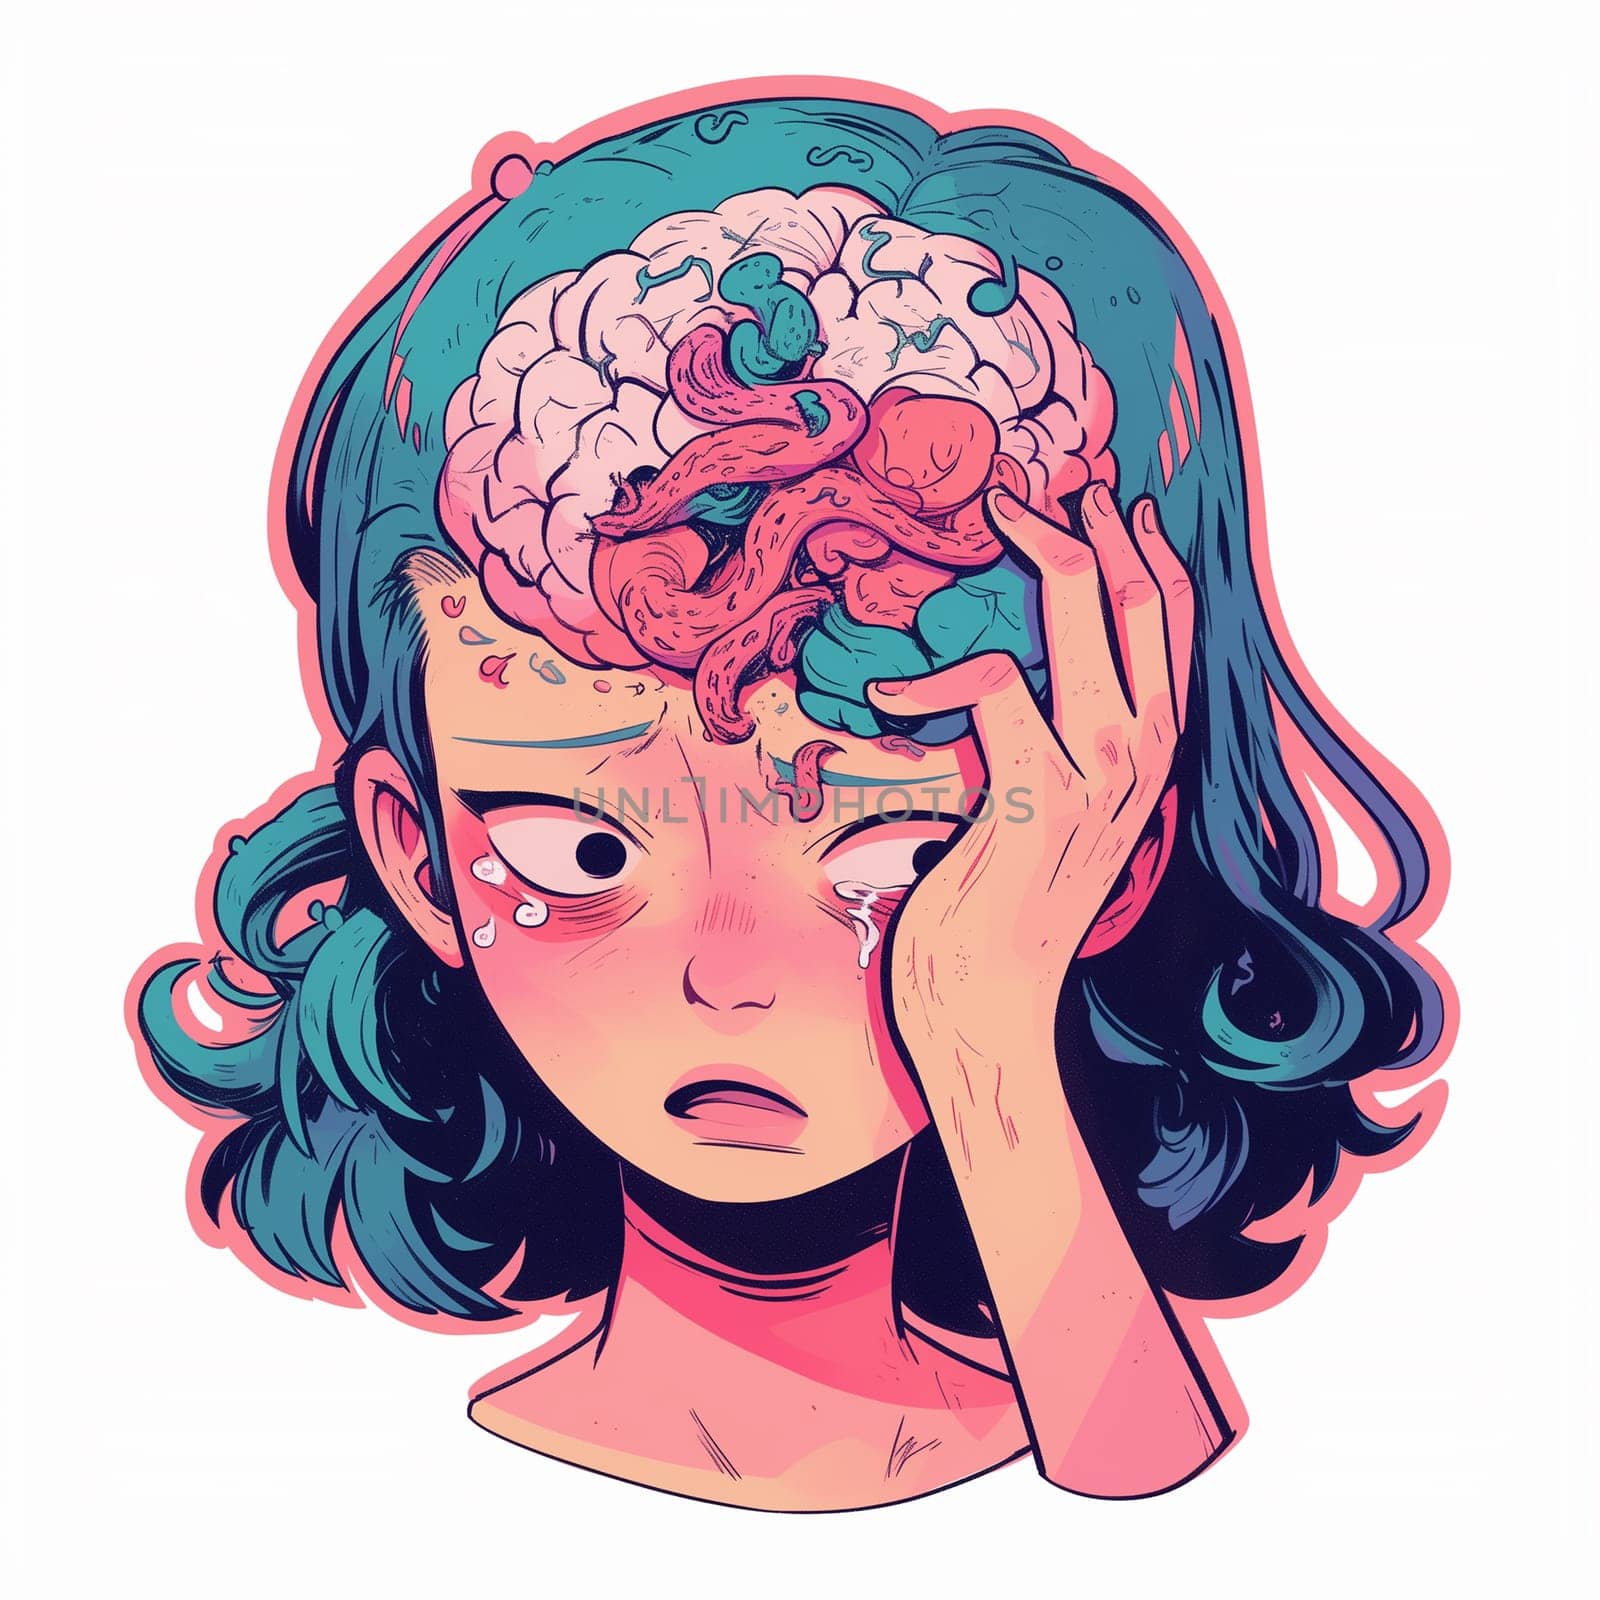 Digital illustration of a female character with an exposed brain, holding her head and crying.